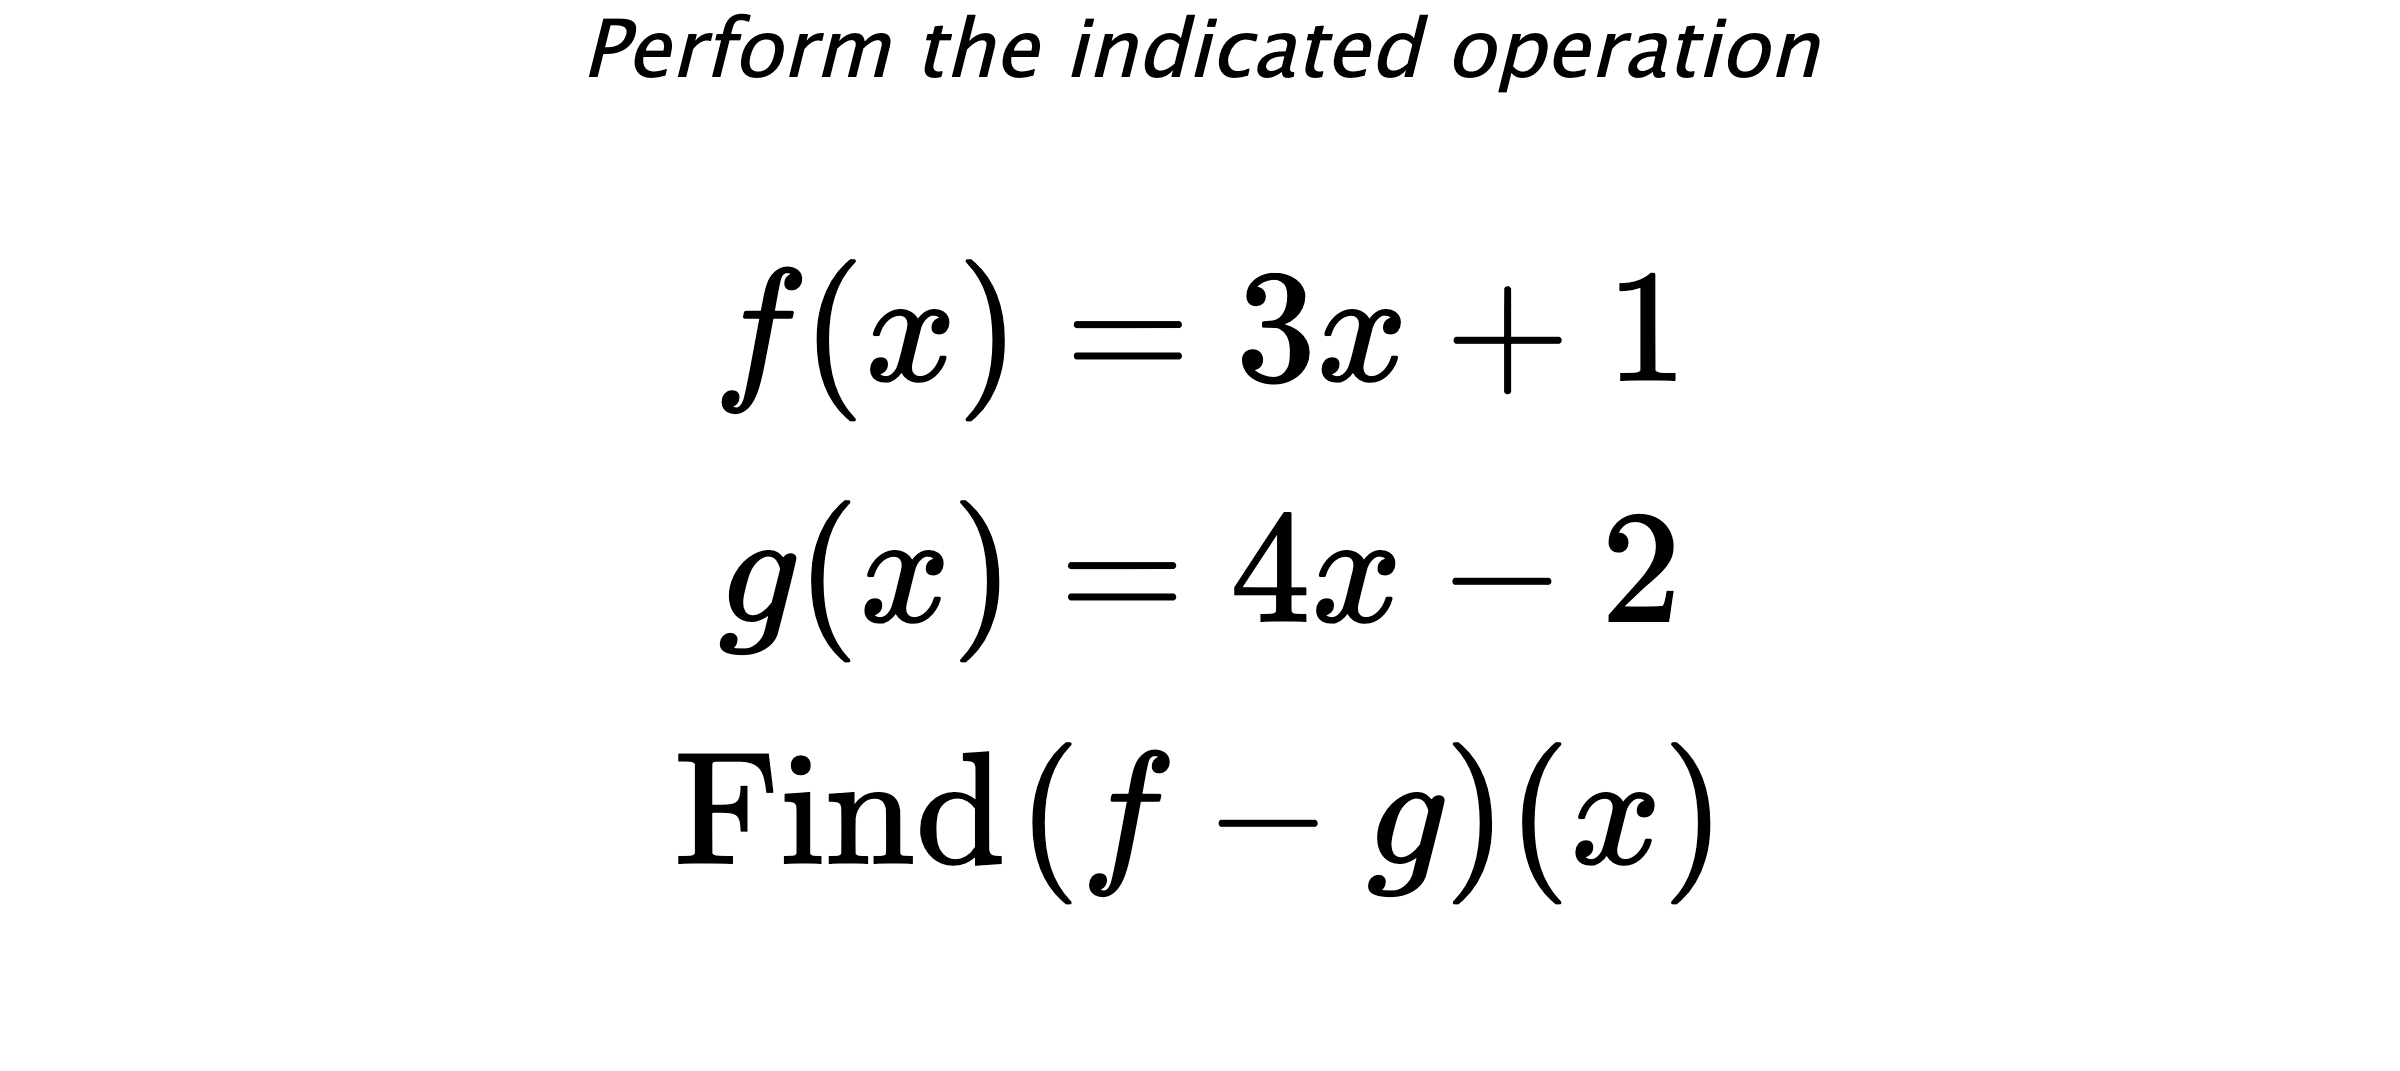 Perform the indicated operation $$ f(x)=3x+1 \\ g(x)=4x-2 \\ \text{Find} \hspace{0.2cm} (f-g)(x) $$